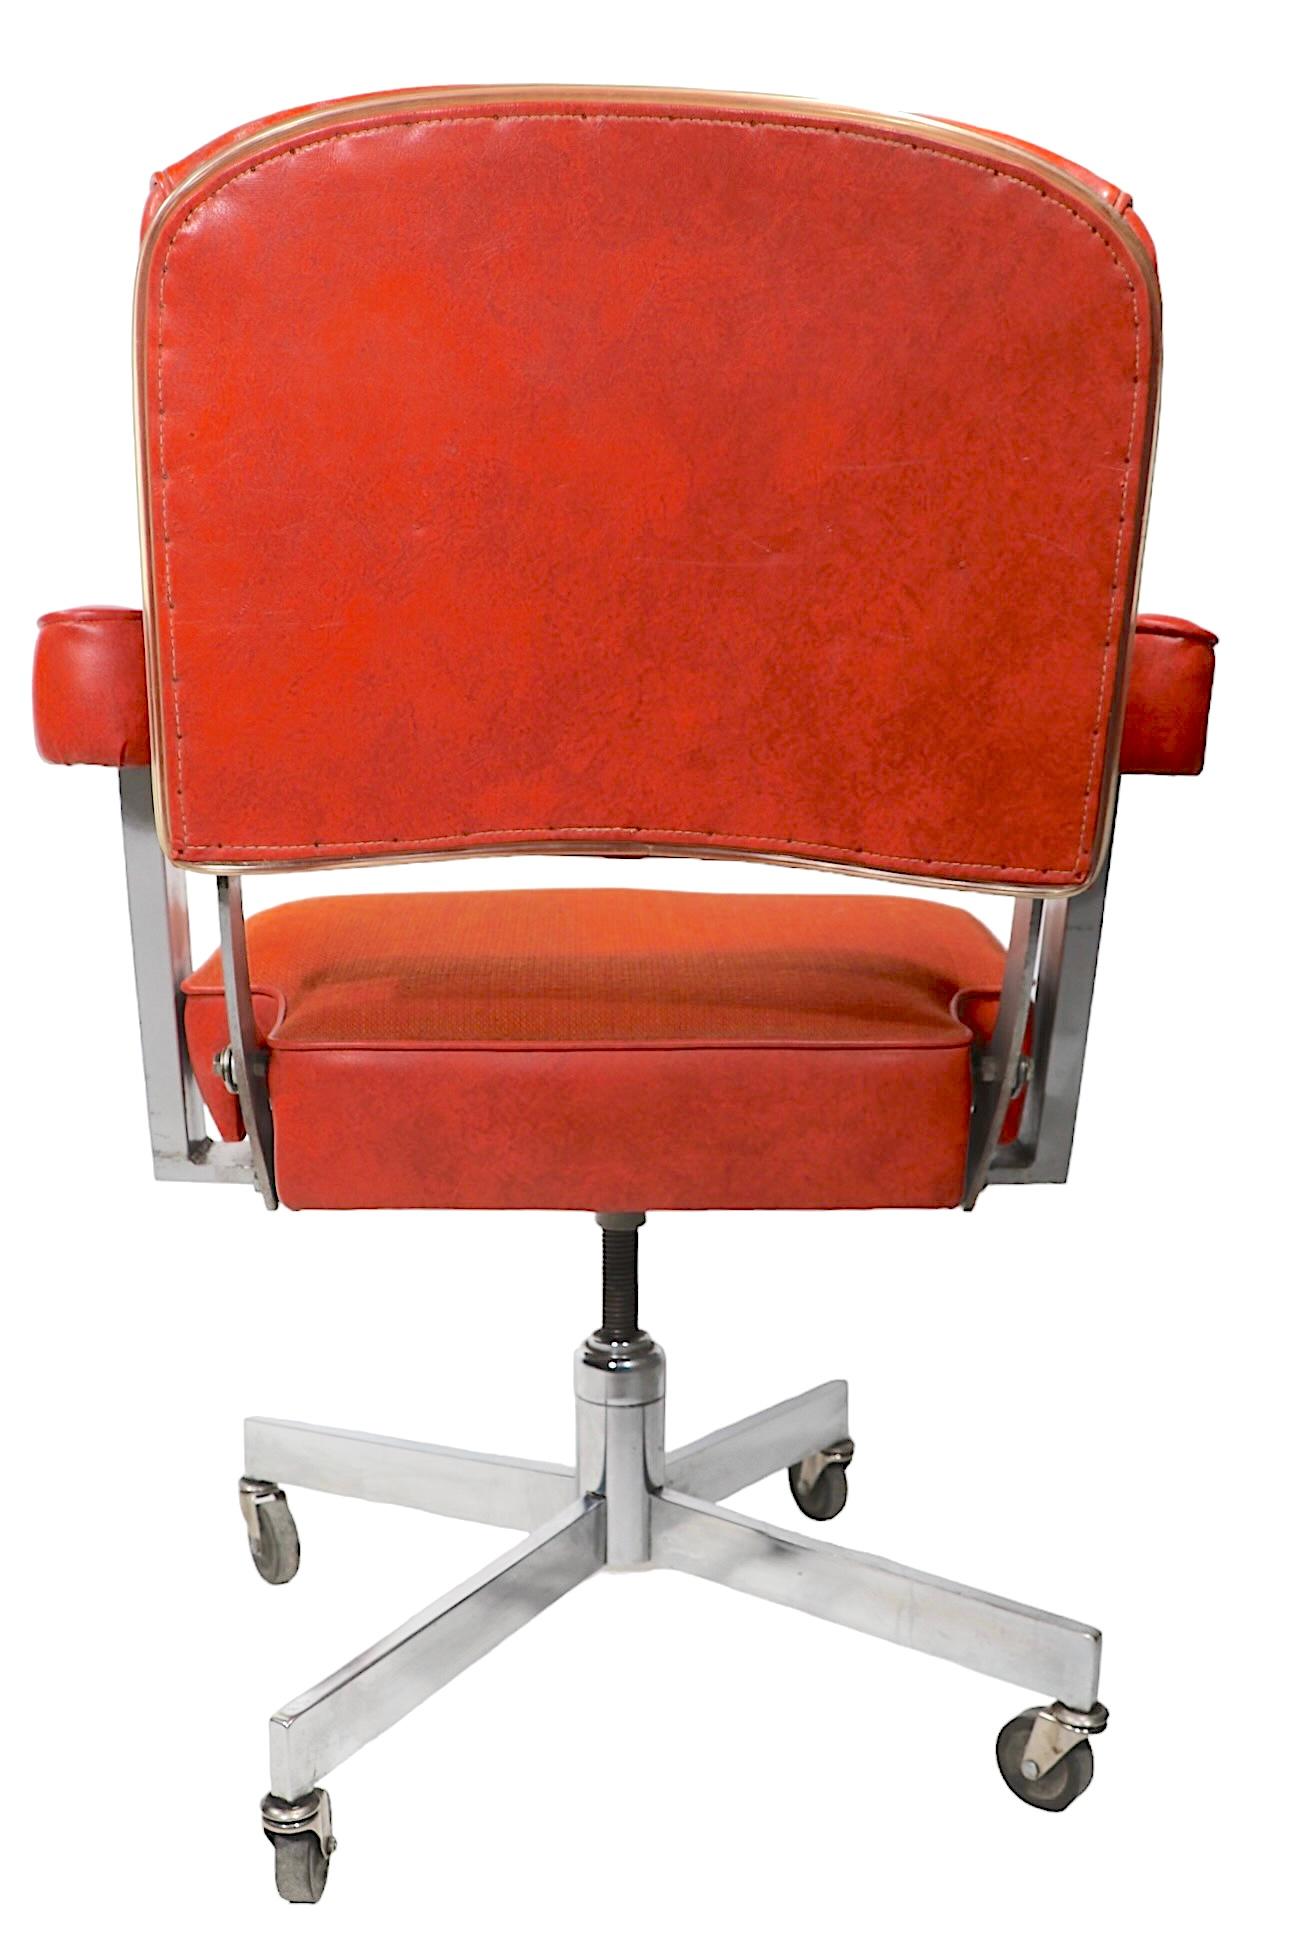 20th Century Executive Model DoMore Swivel Desk Office Chair Model 616 c 1950/1960's  For Sale